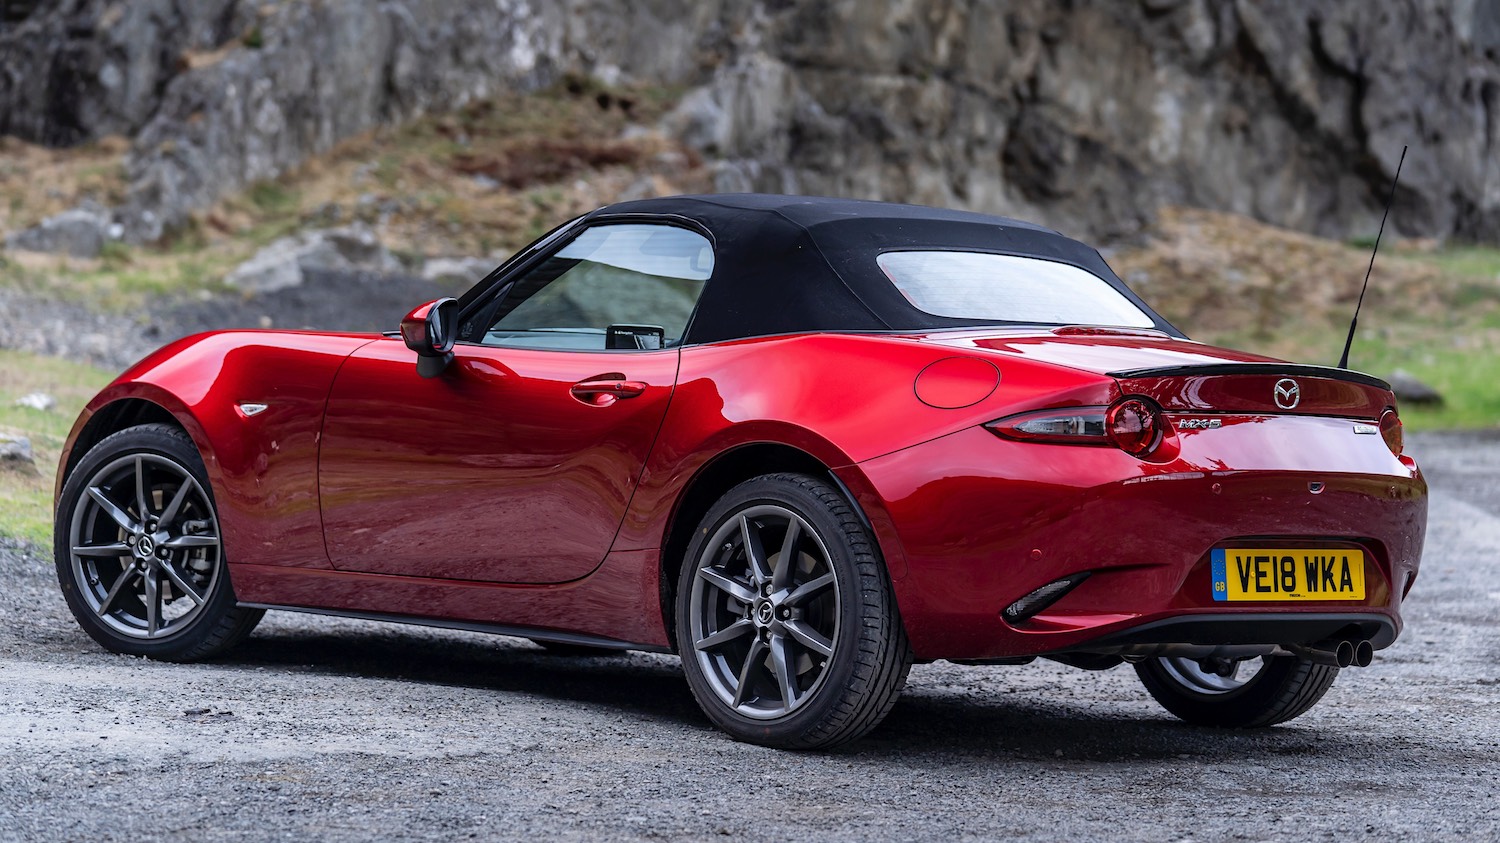 drive-Maggie Barry drives the New 2019 Mazda MX-5 at the lanch event in Ireland 4